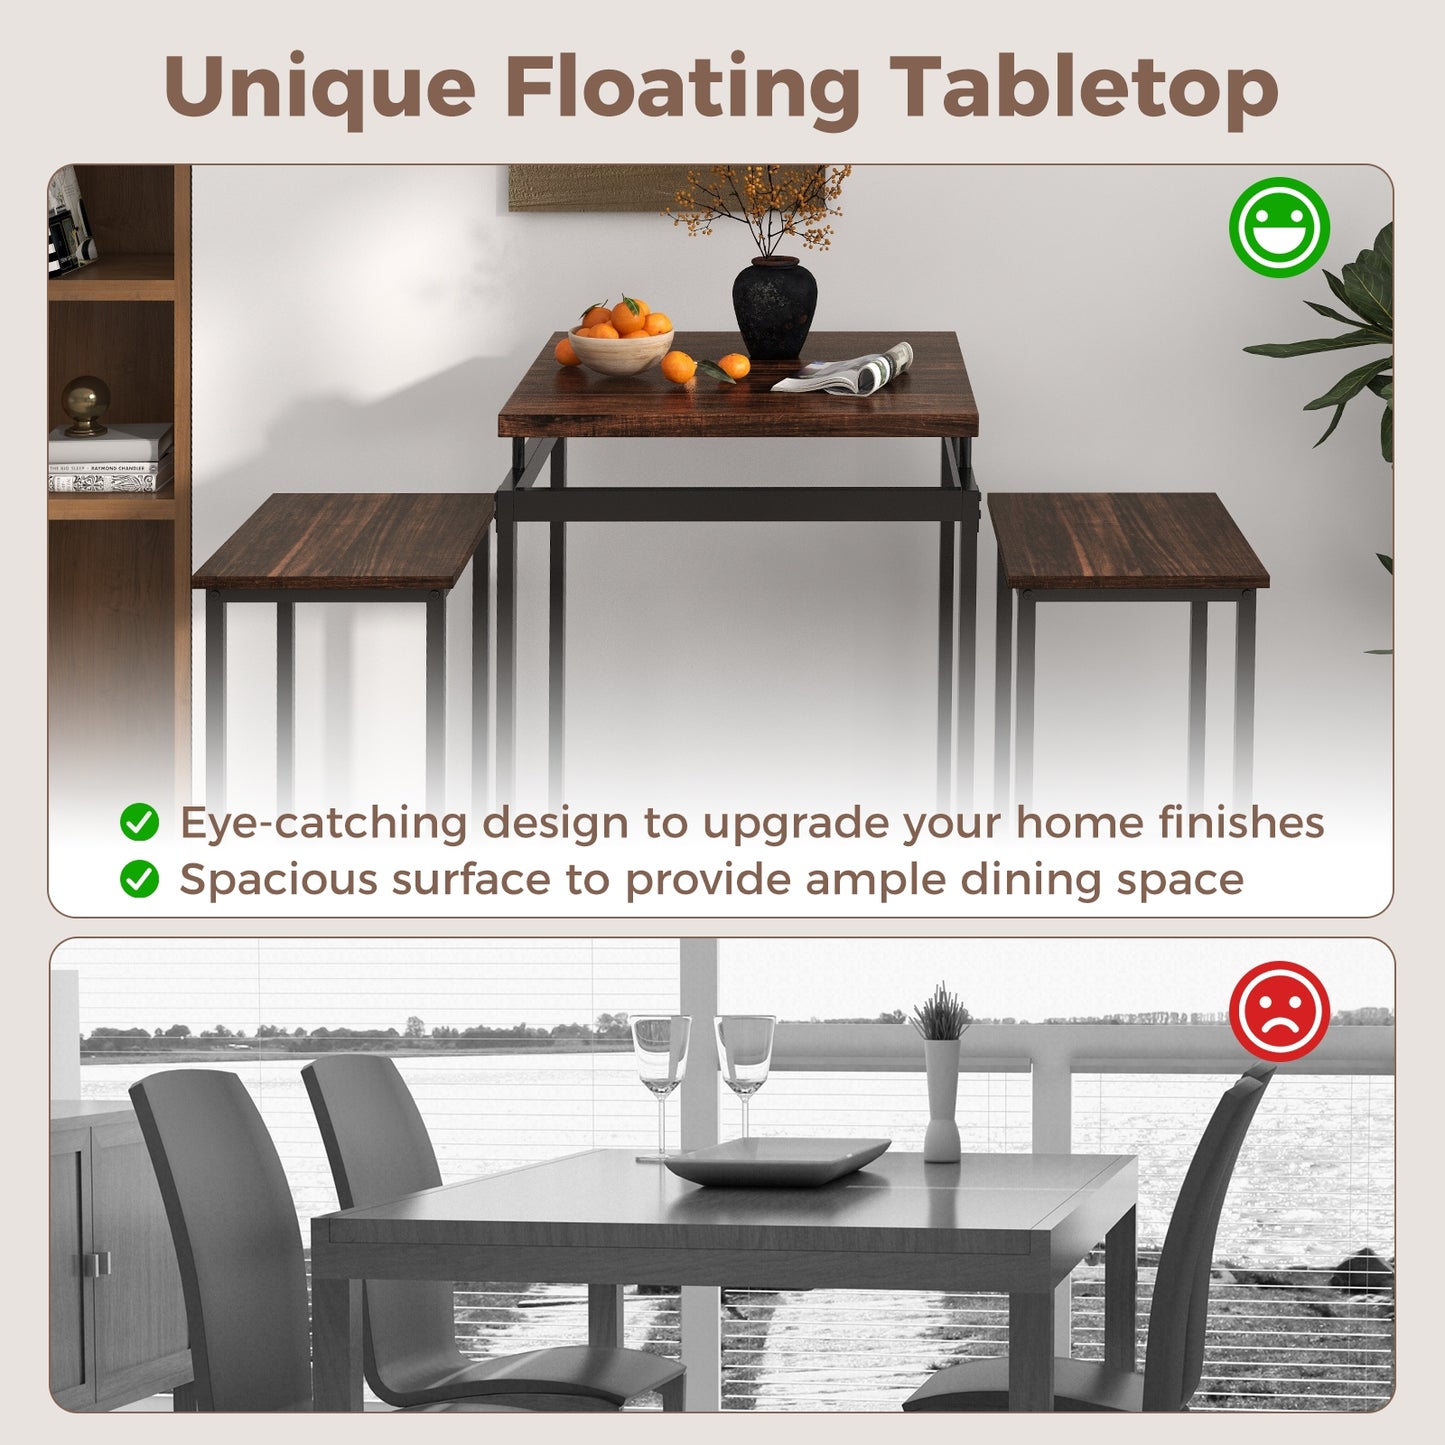 3 Pieces Pub Dining Table Set with Floating Tabletop and Footrest-Rustic Brown